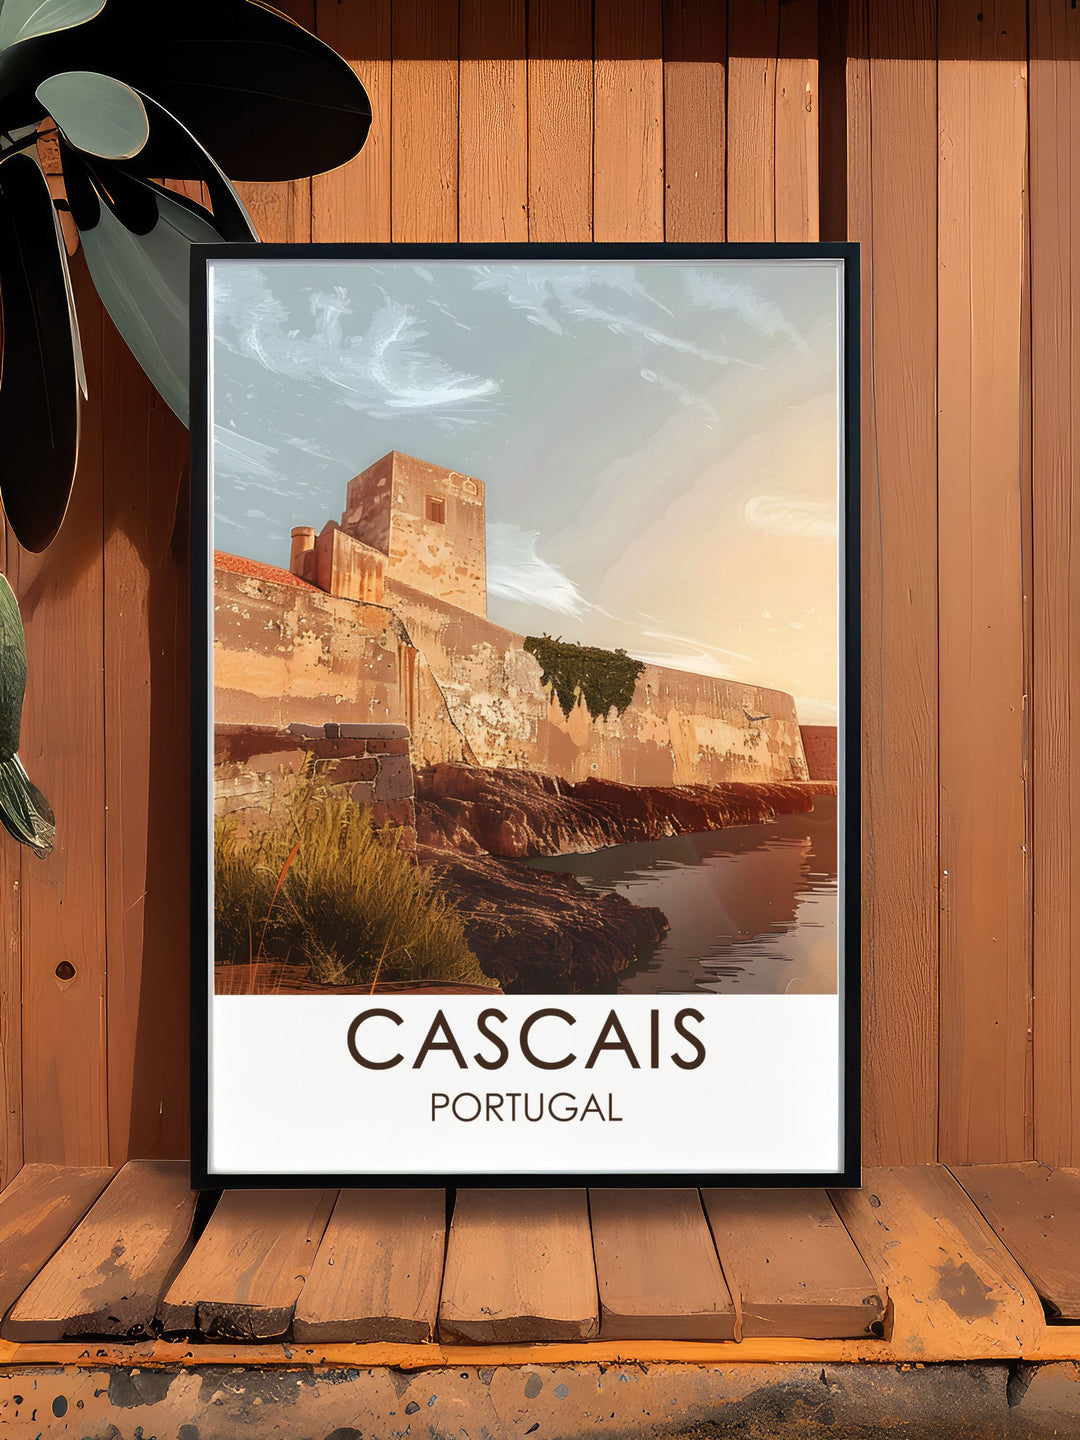 Experience the charm of Cascais old town with this art print, featuring its narrow streets, colorful houses, and historic buildings.